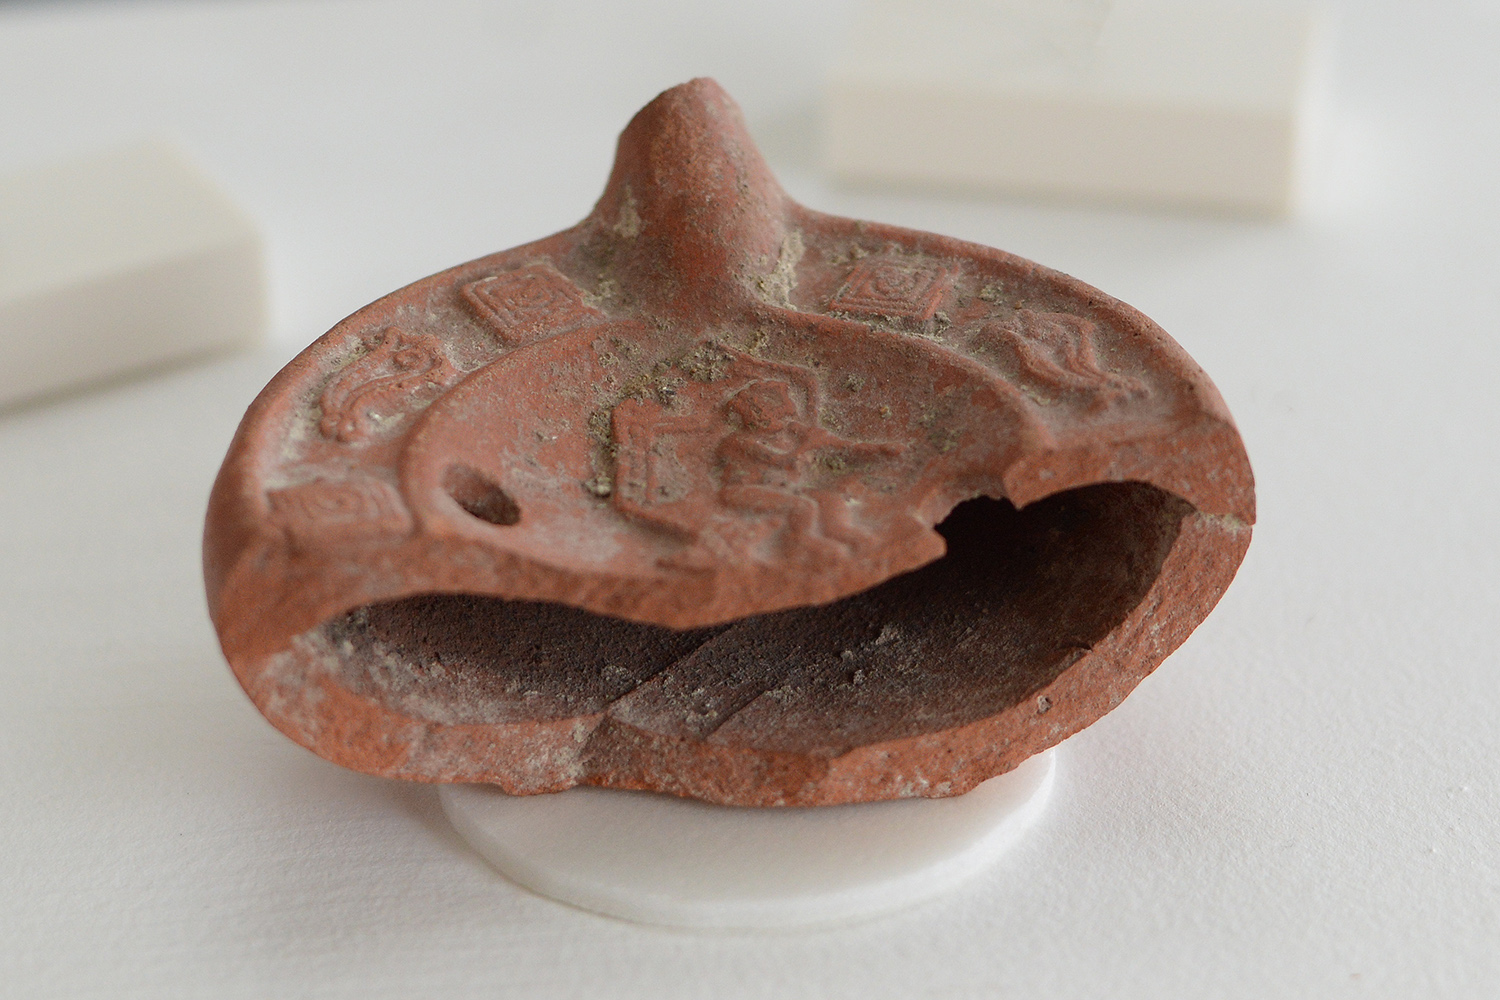 Margaret Sullivan '23 examined a ceramic North African oil lamp from the 4th or 5th century CE. "This mold-made lamp has a shallow, bulbous base. Two fill holes puncture the lamp's fracture top, which is adorned with alternating square and fish-like motifs, all surrounding a seated musician figure. This central image of music-making illustrated pleasurable, secular activities," she explained.  